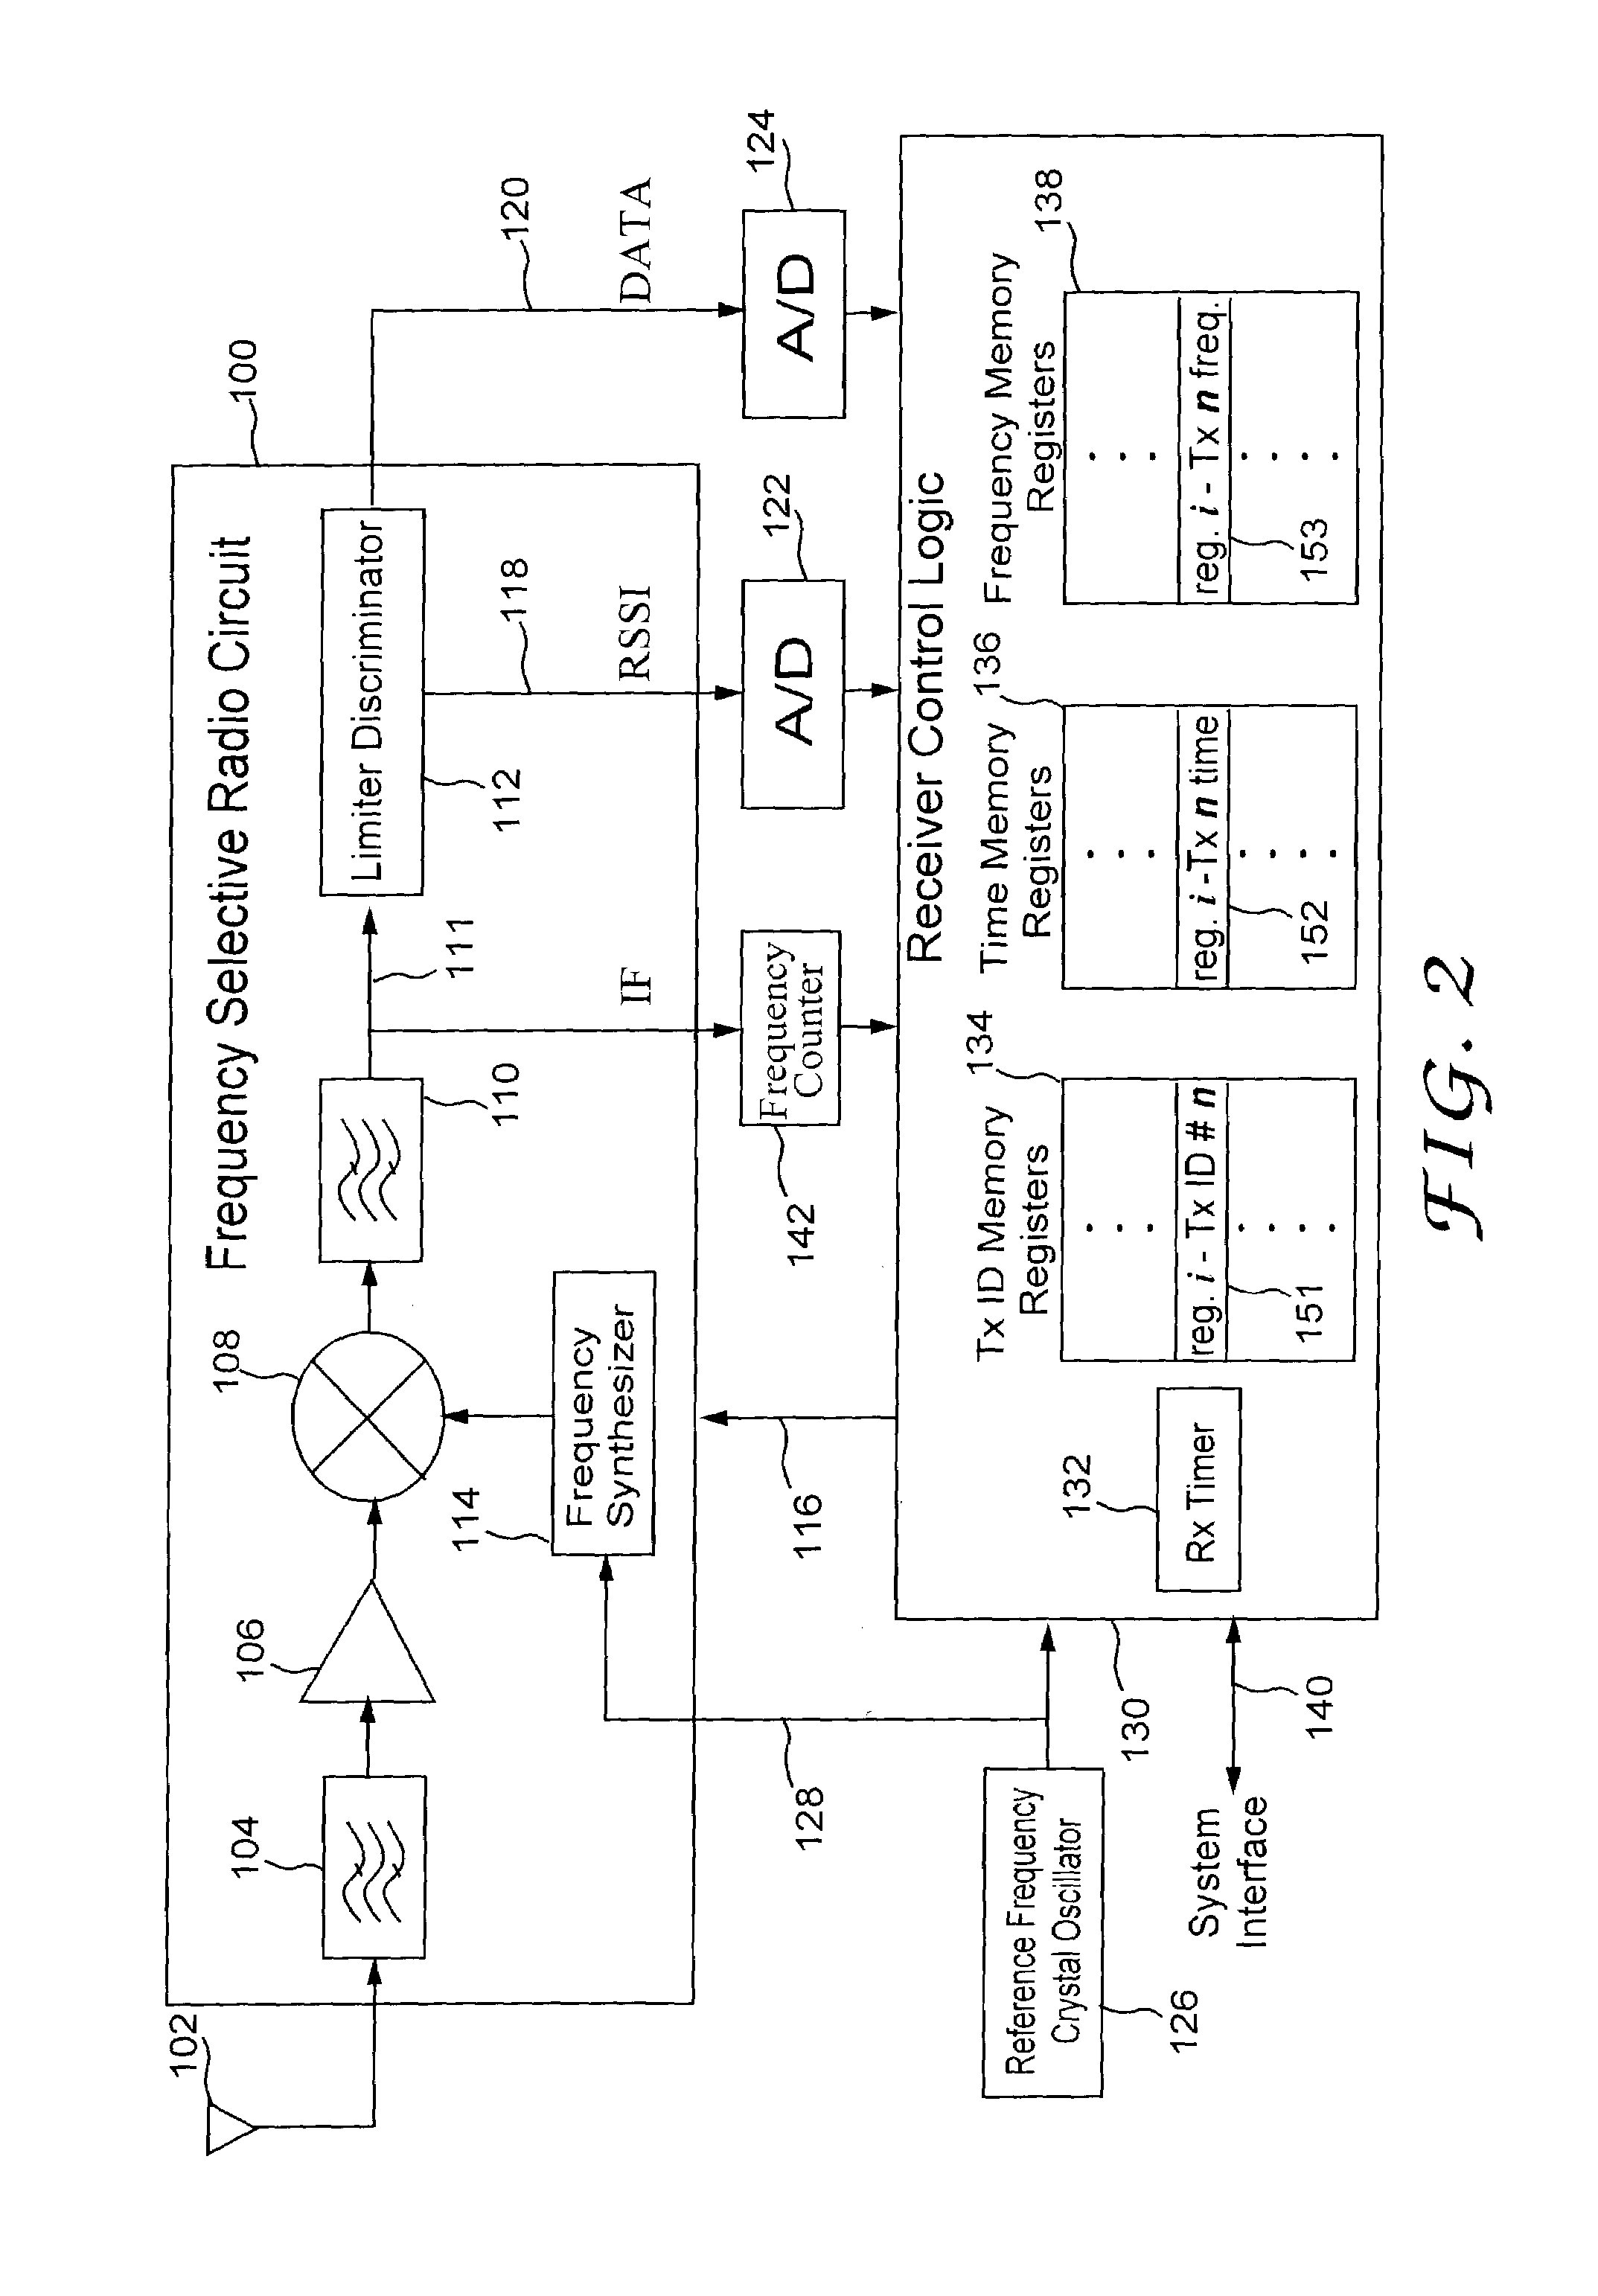 Frequency hopping system for intermittent transmission